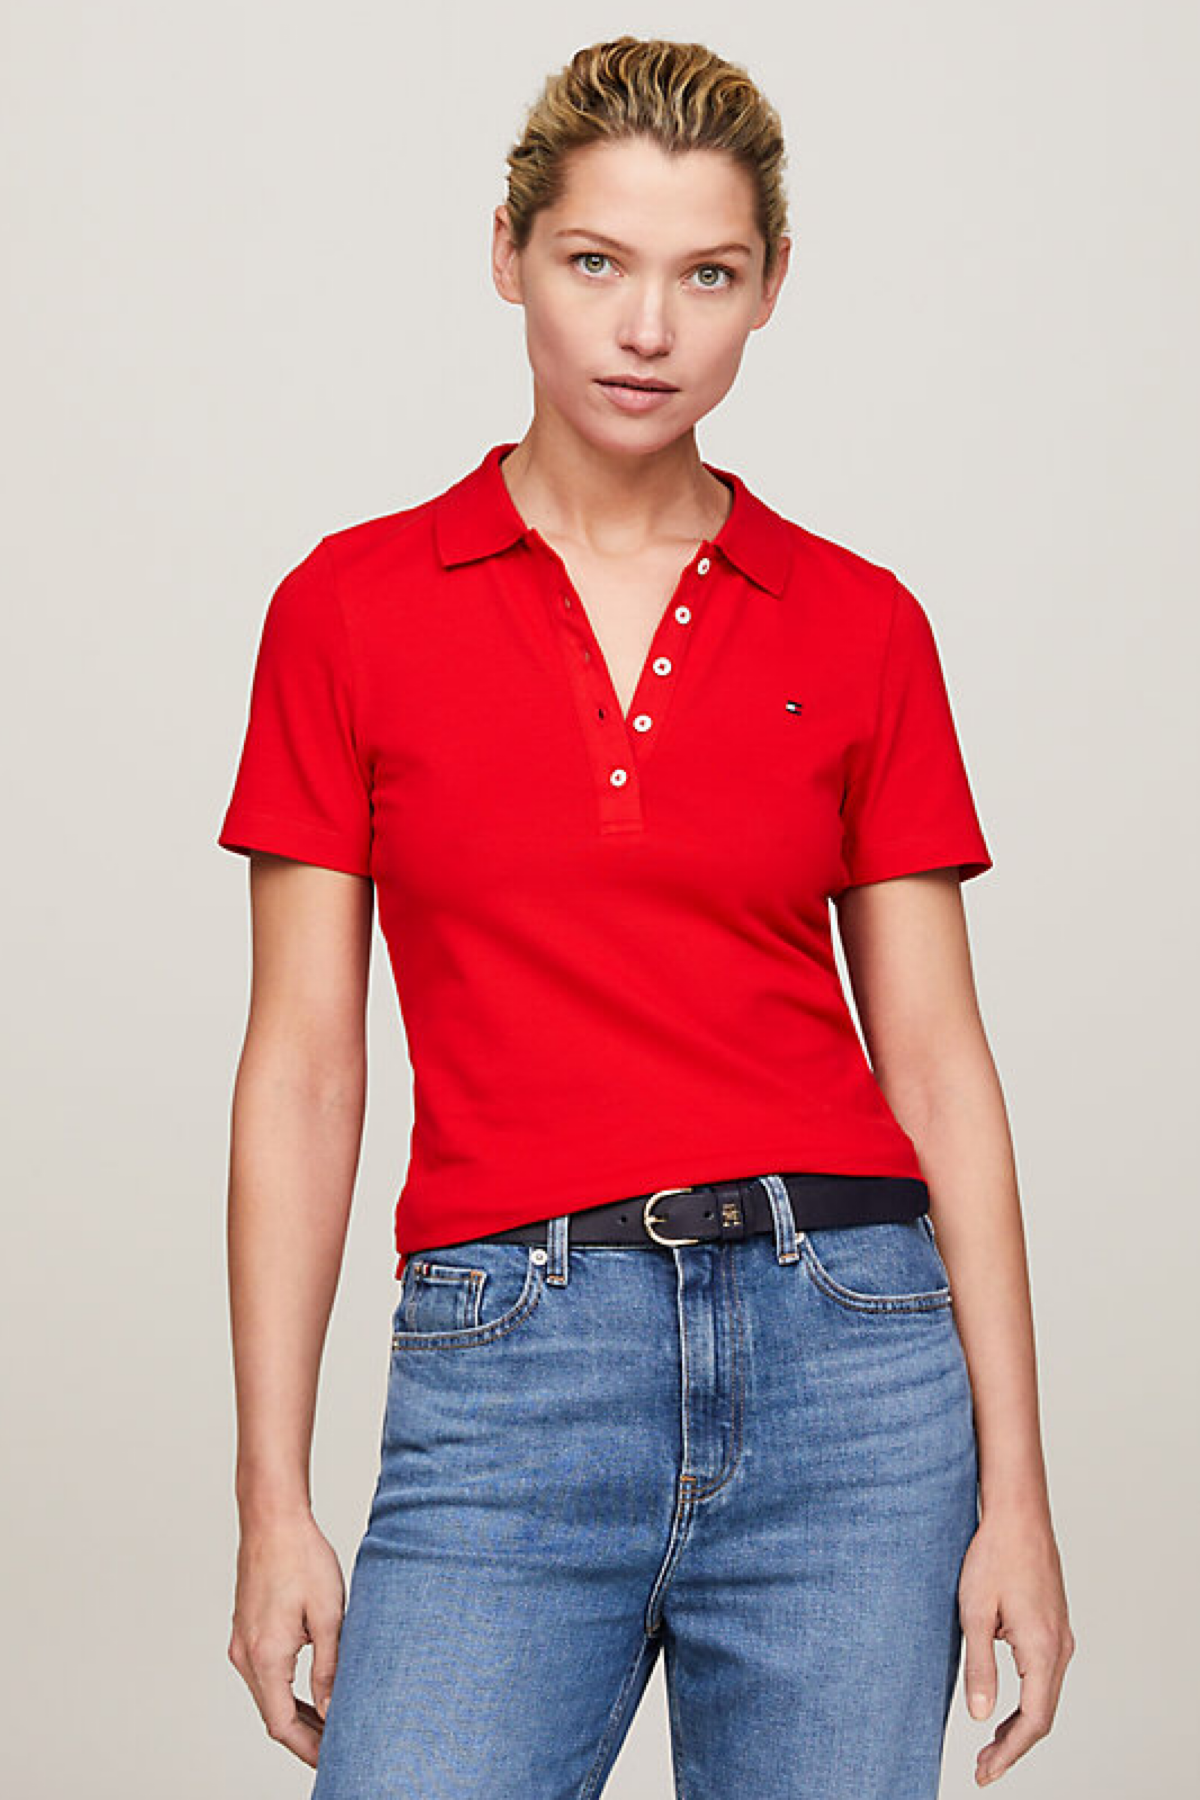 Tommy Hilfiger polo 1985 collection slim fit red